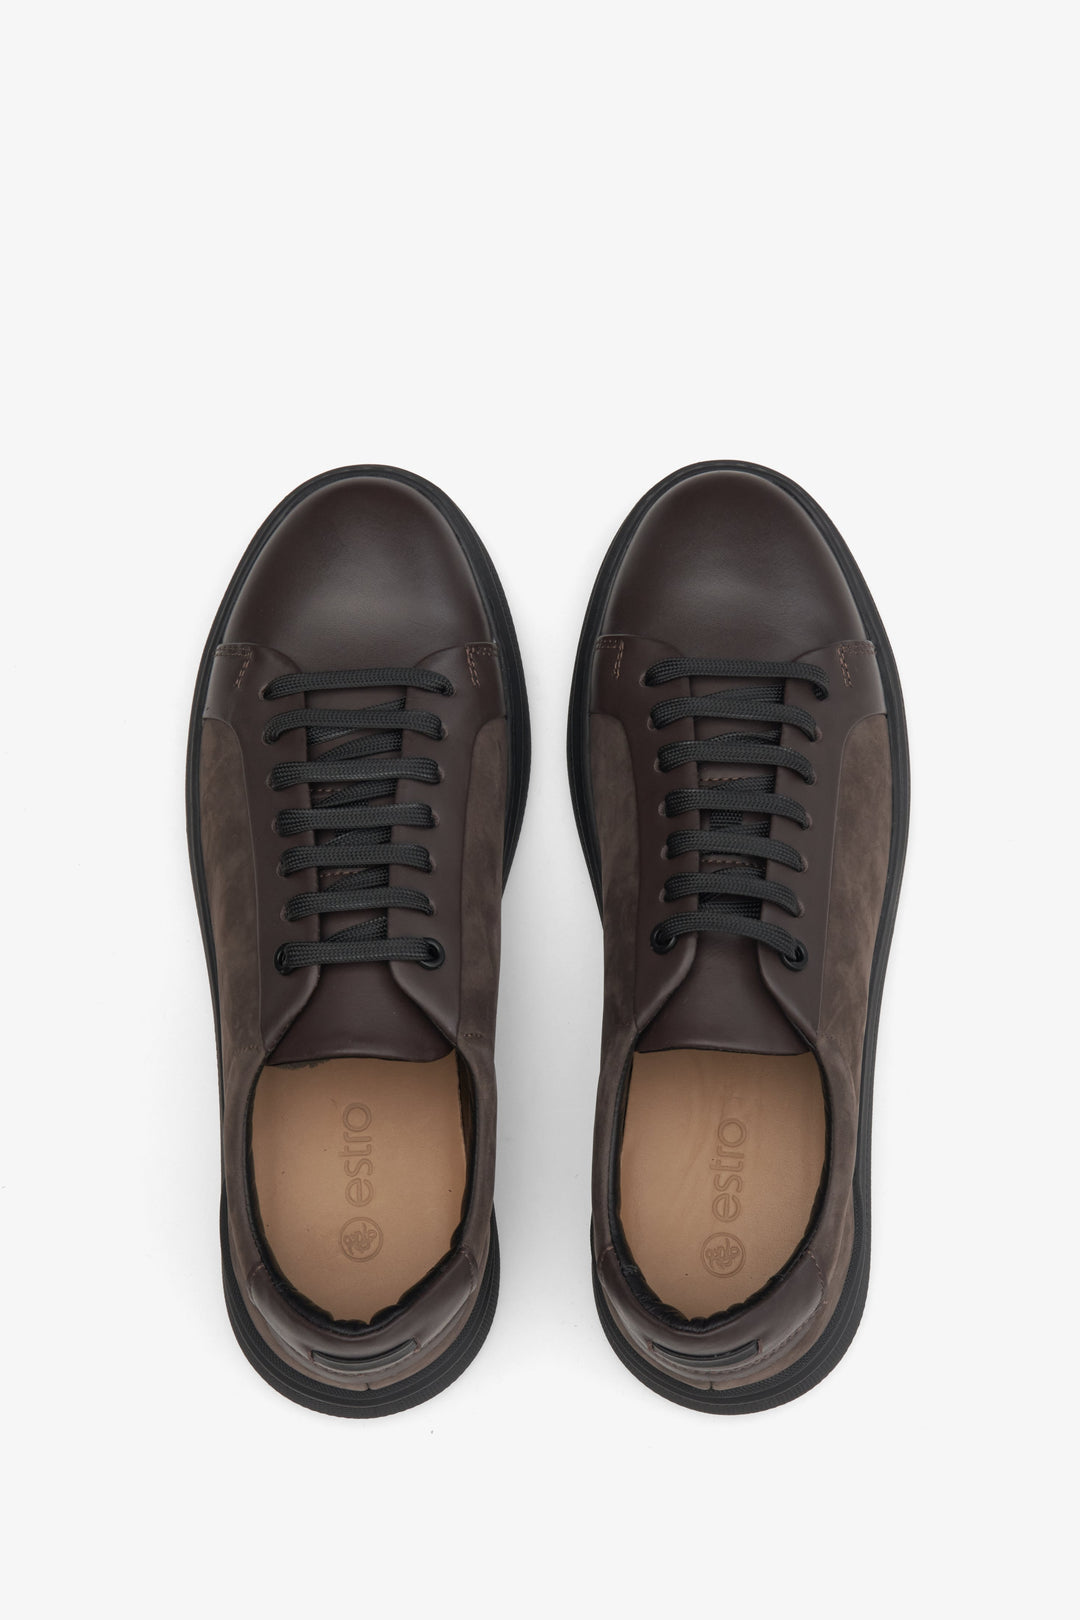 Dark brown leather and suede men's sneakers by Estro - top view presentation of the model.